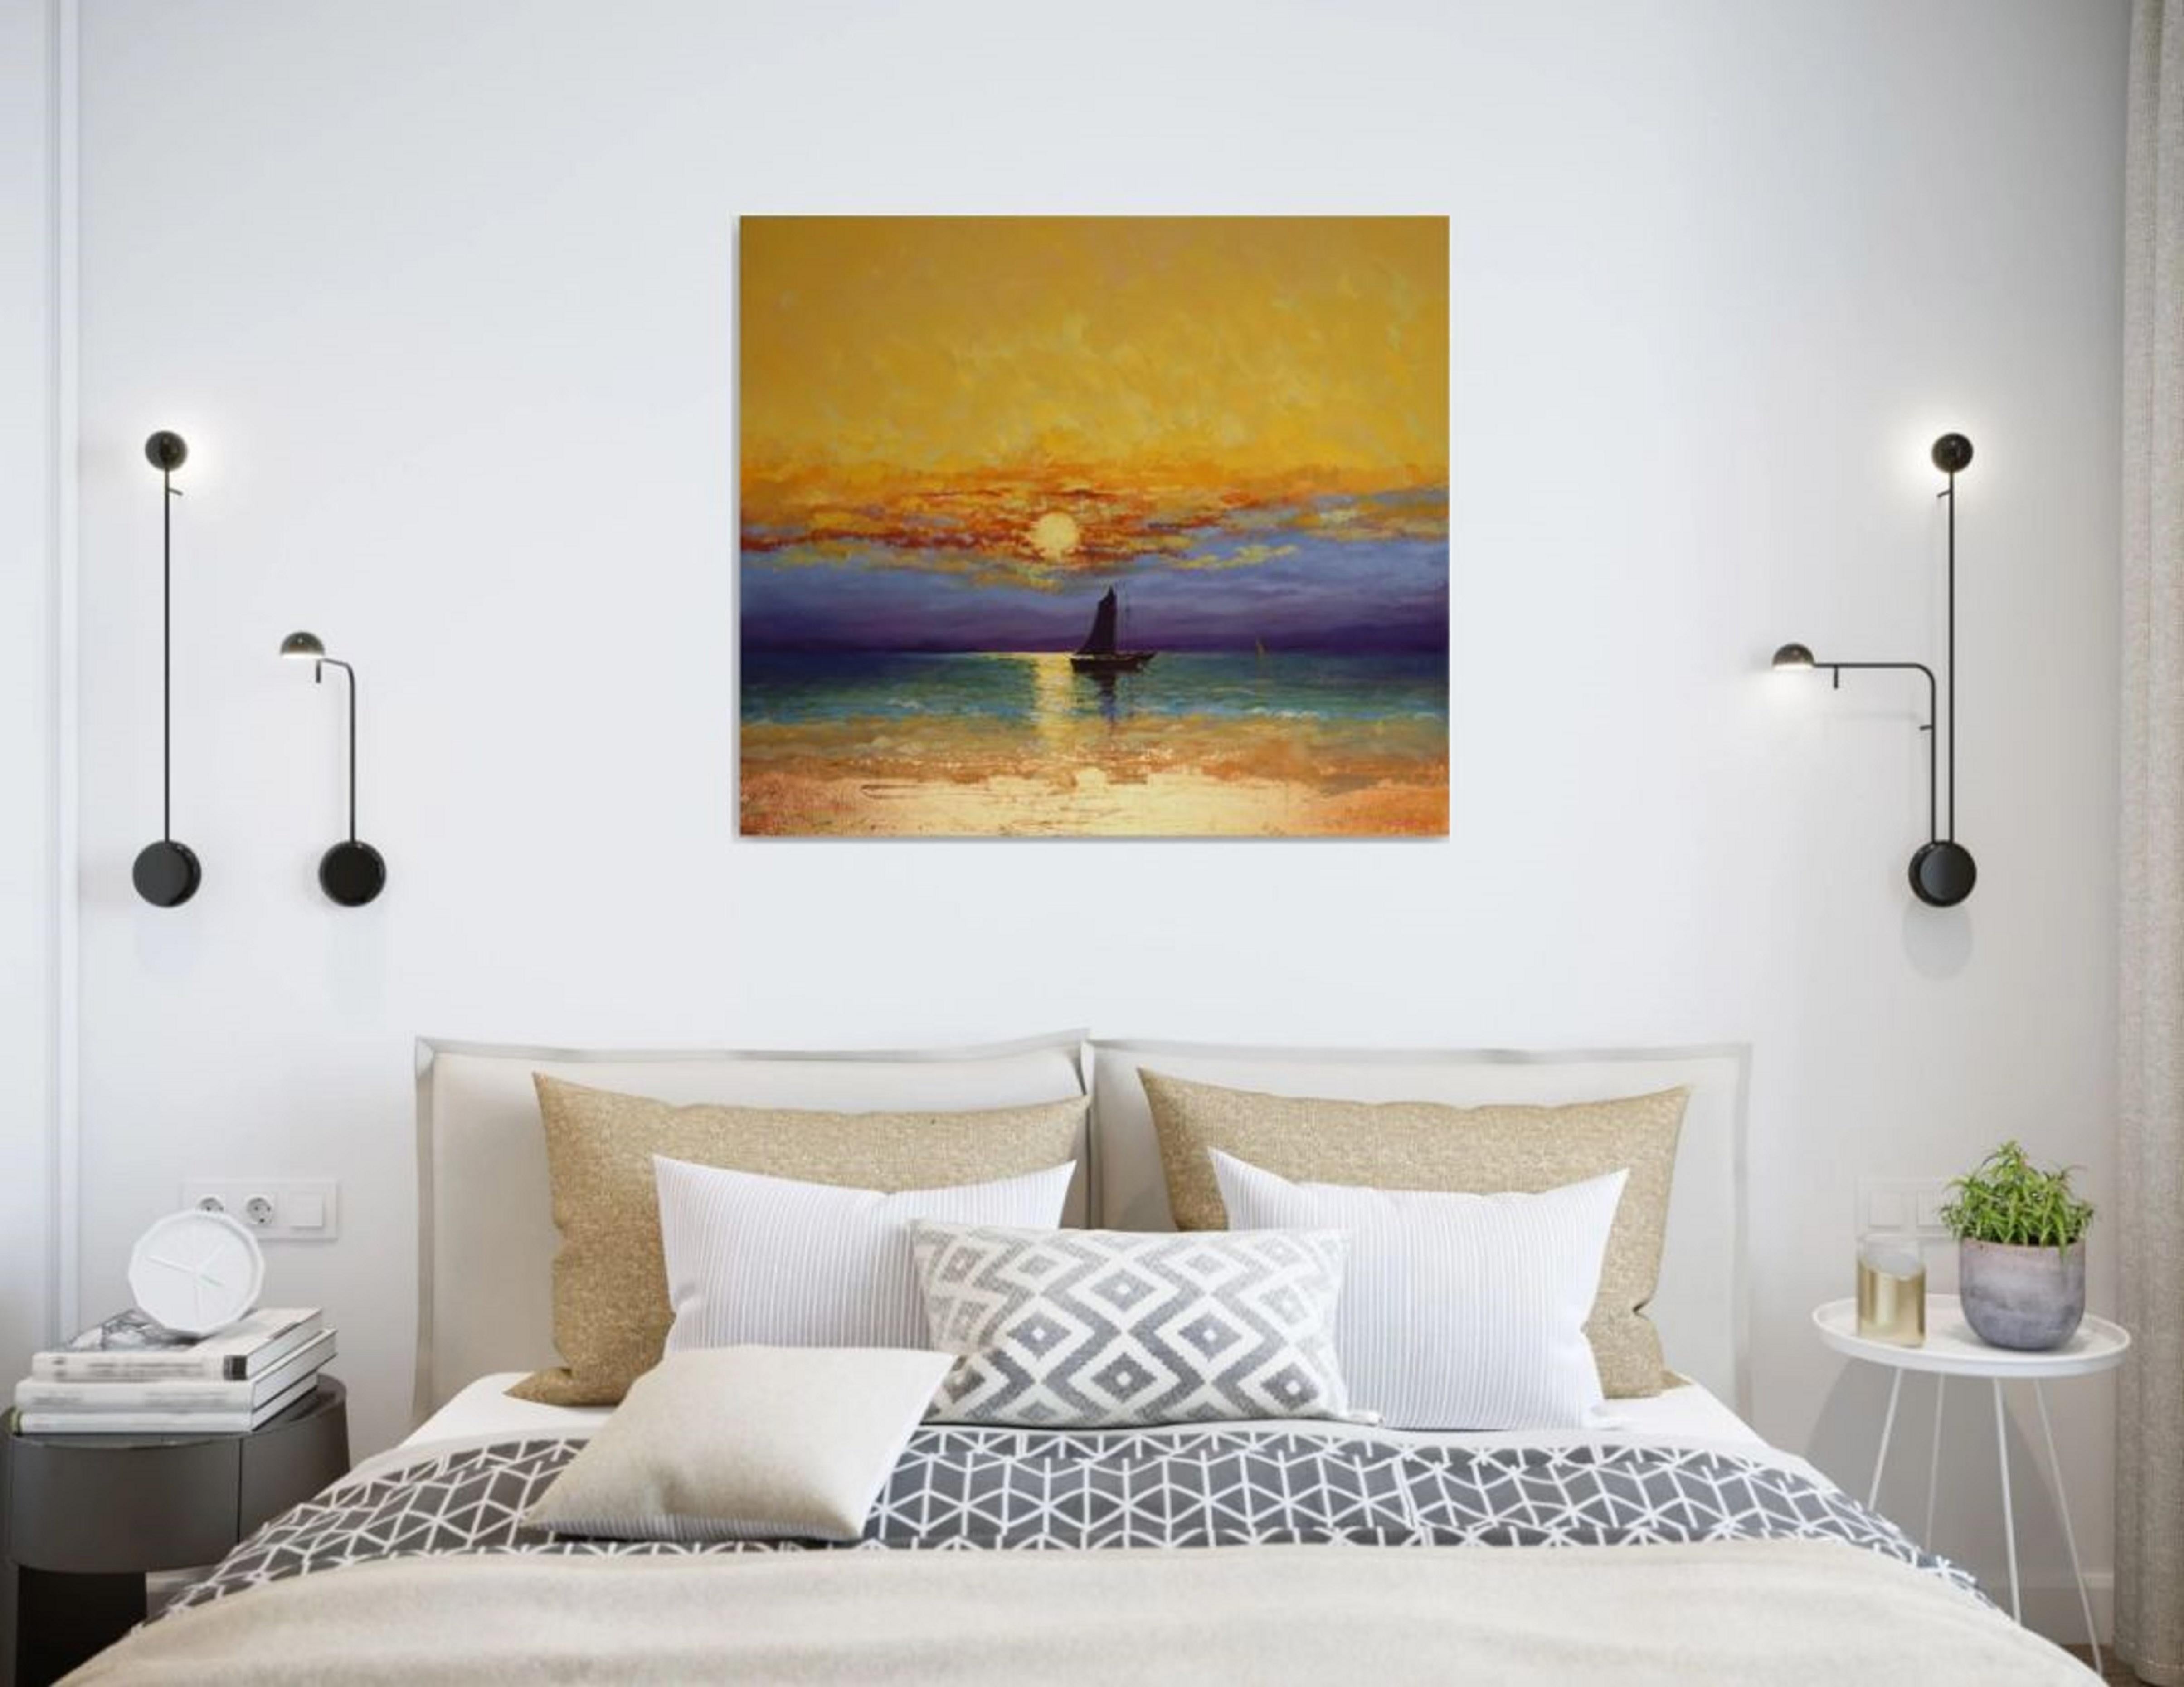 In this artwork, I intertwined the fervor of expressionism with the delicate touch of impressionism, using acrylic and oil to capture the sublime interplay of light and texture. The horizon beckons with a blend of fiery skies and tranquil waters,